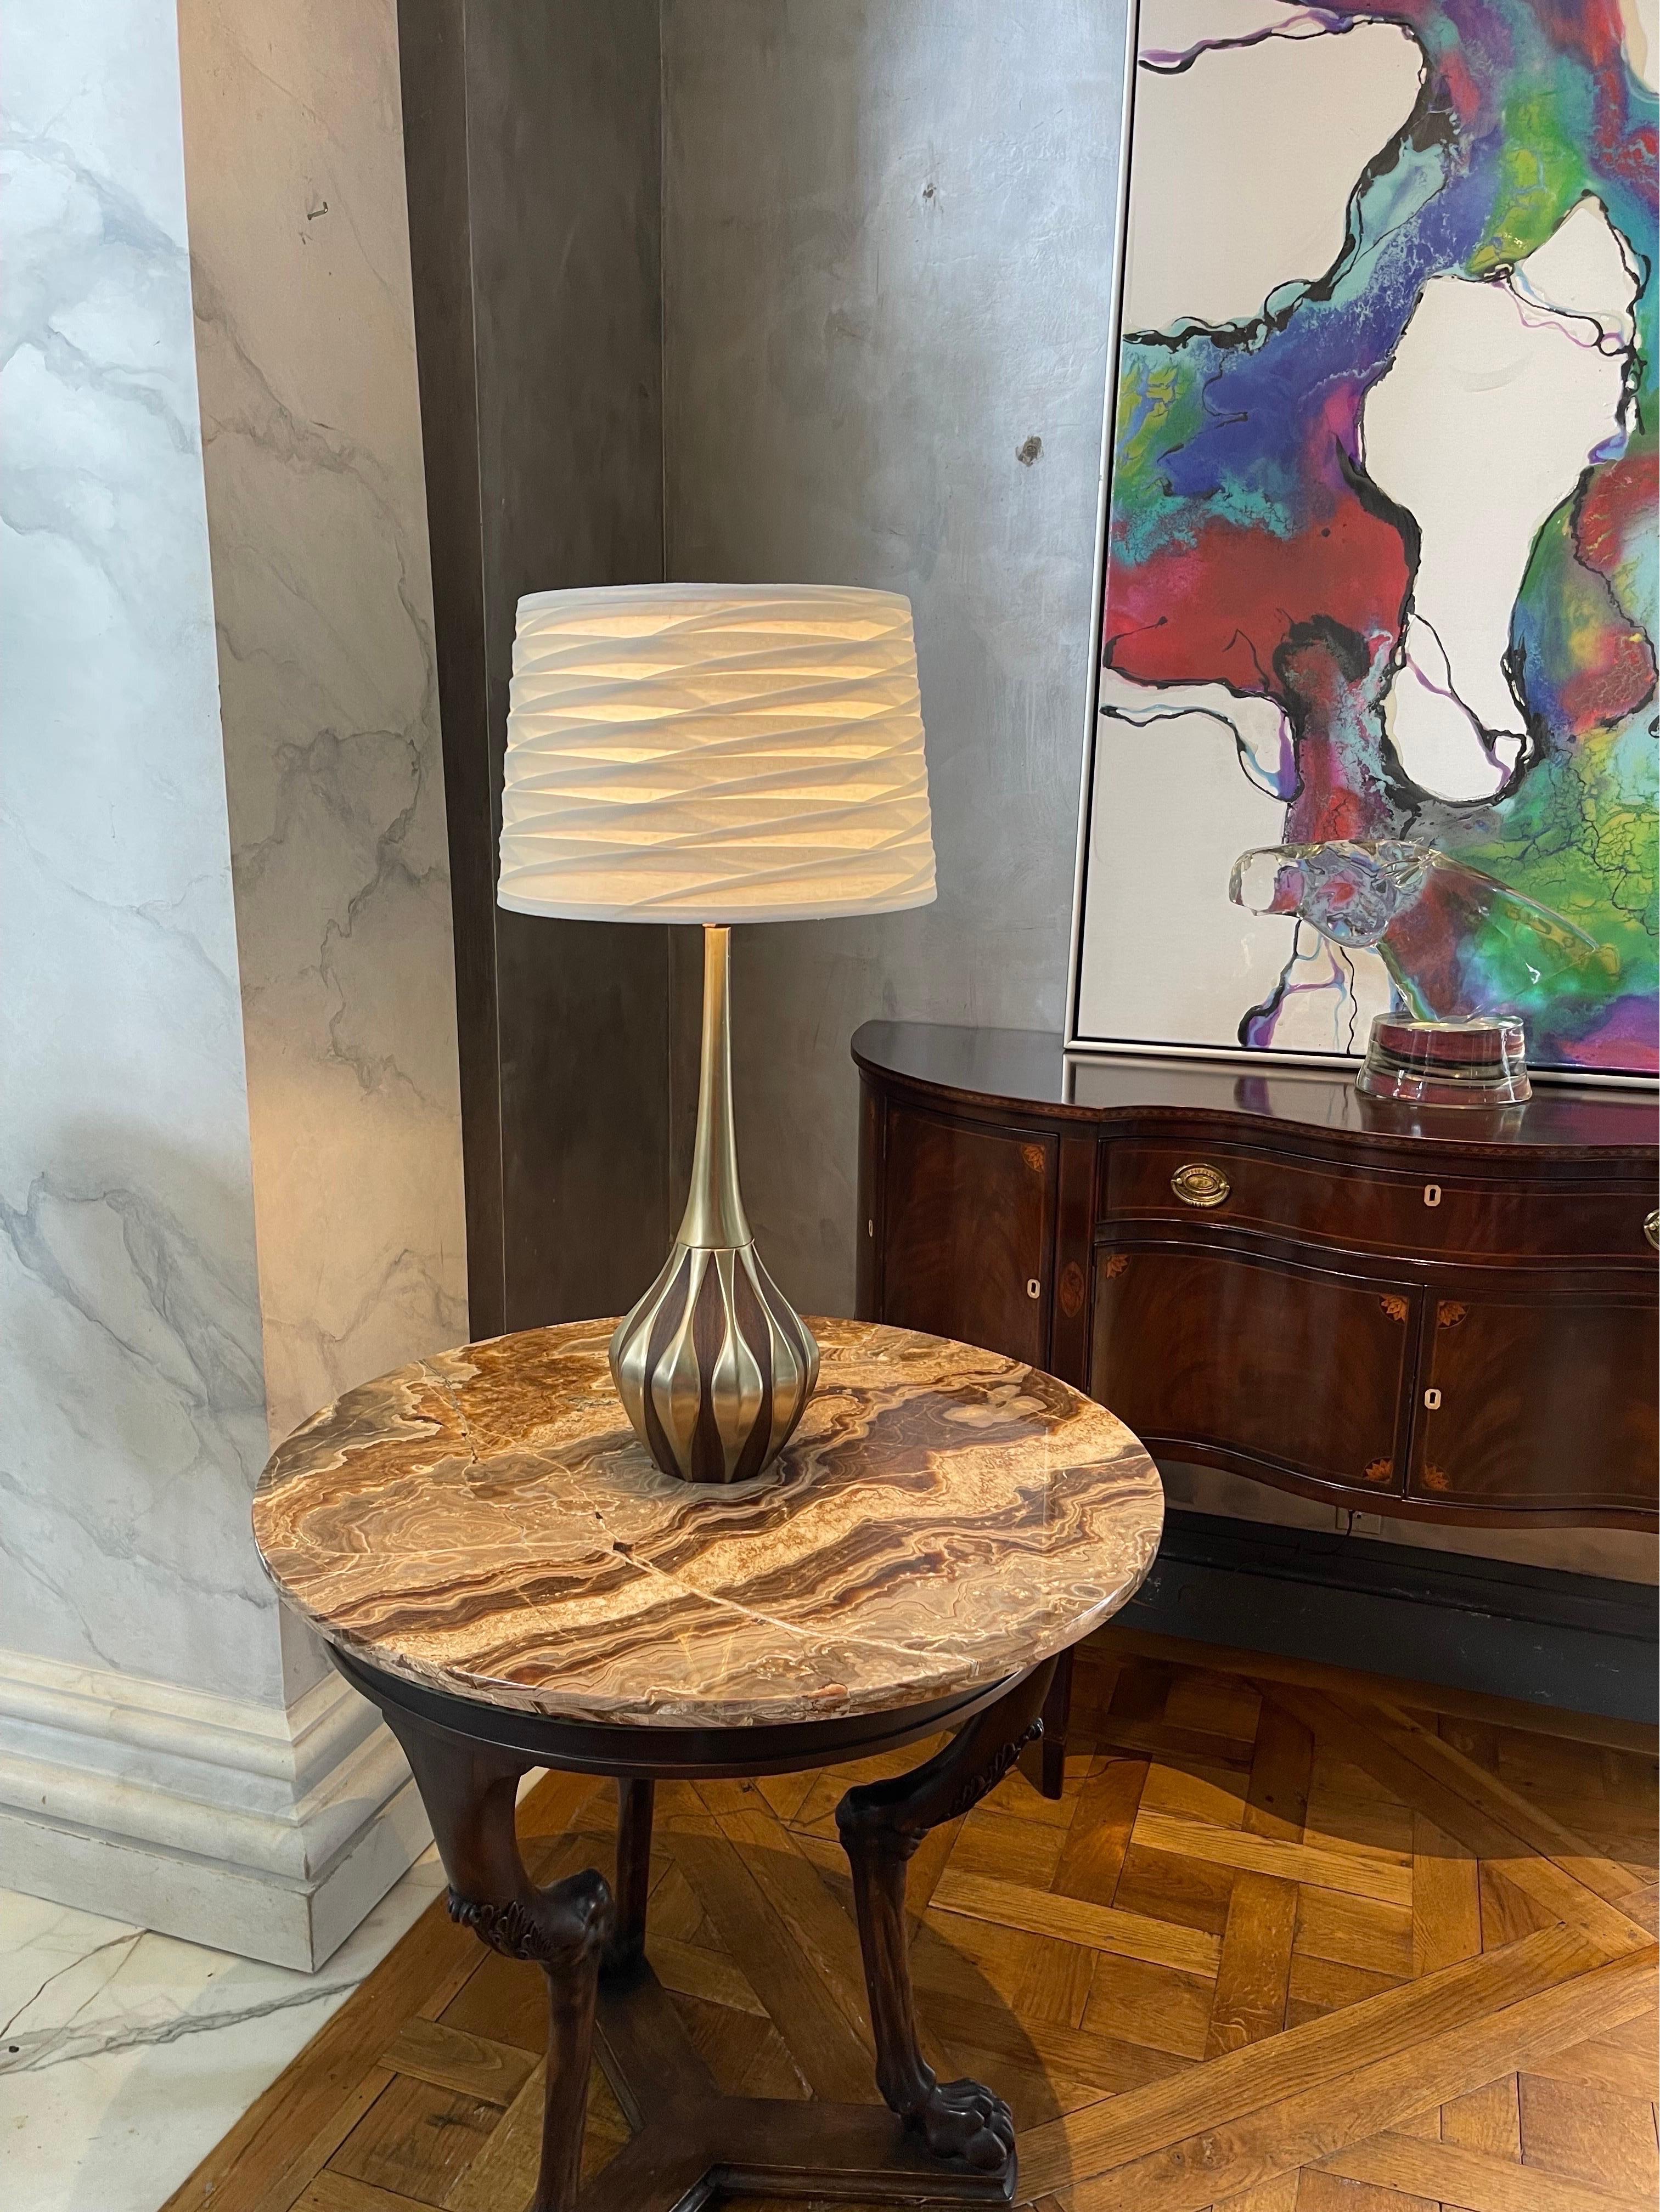 The Laurel Lamp Mfg. Co. of Newark, NJ produced a variety of high quality mid century modern lighting and lamp products in the United States. The designers used walnut and other wood veneers on solid metal creating organic forms. Laurel Lamp Company